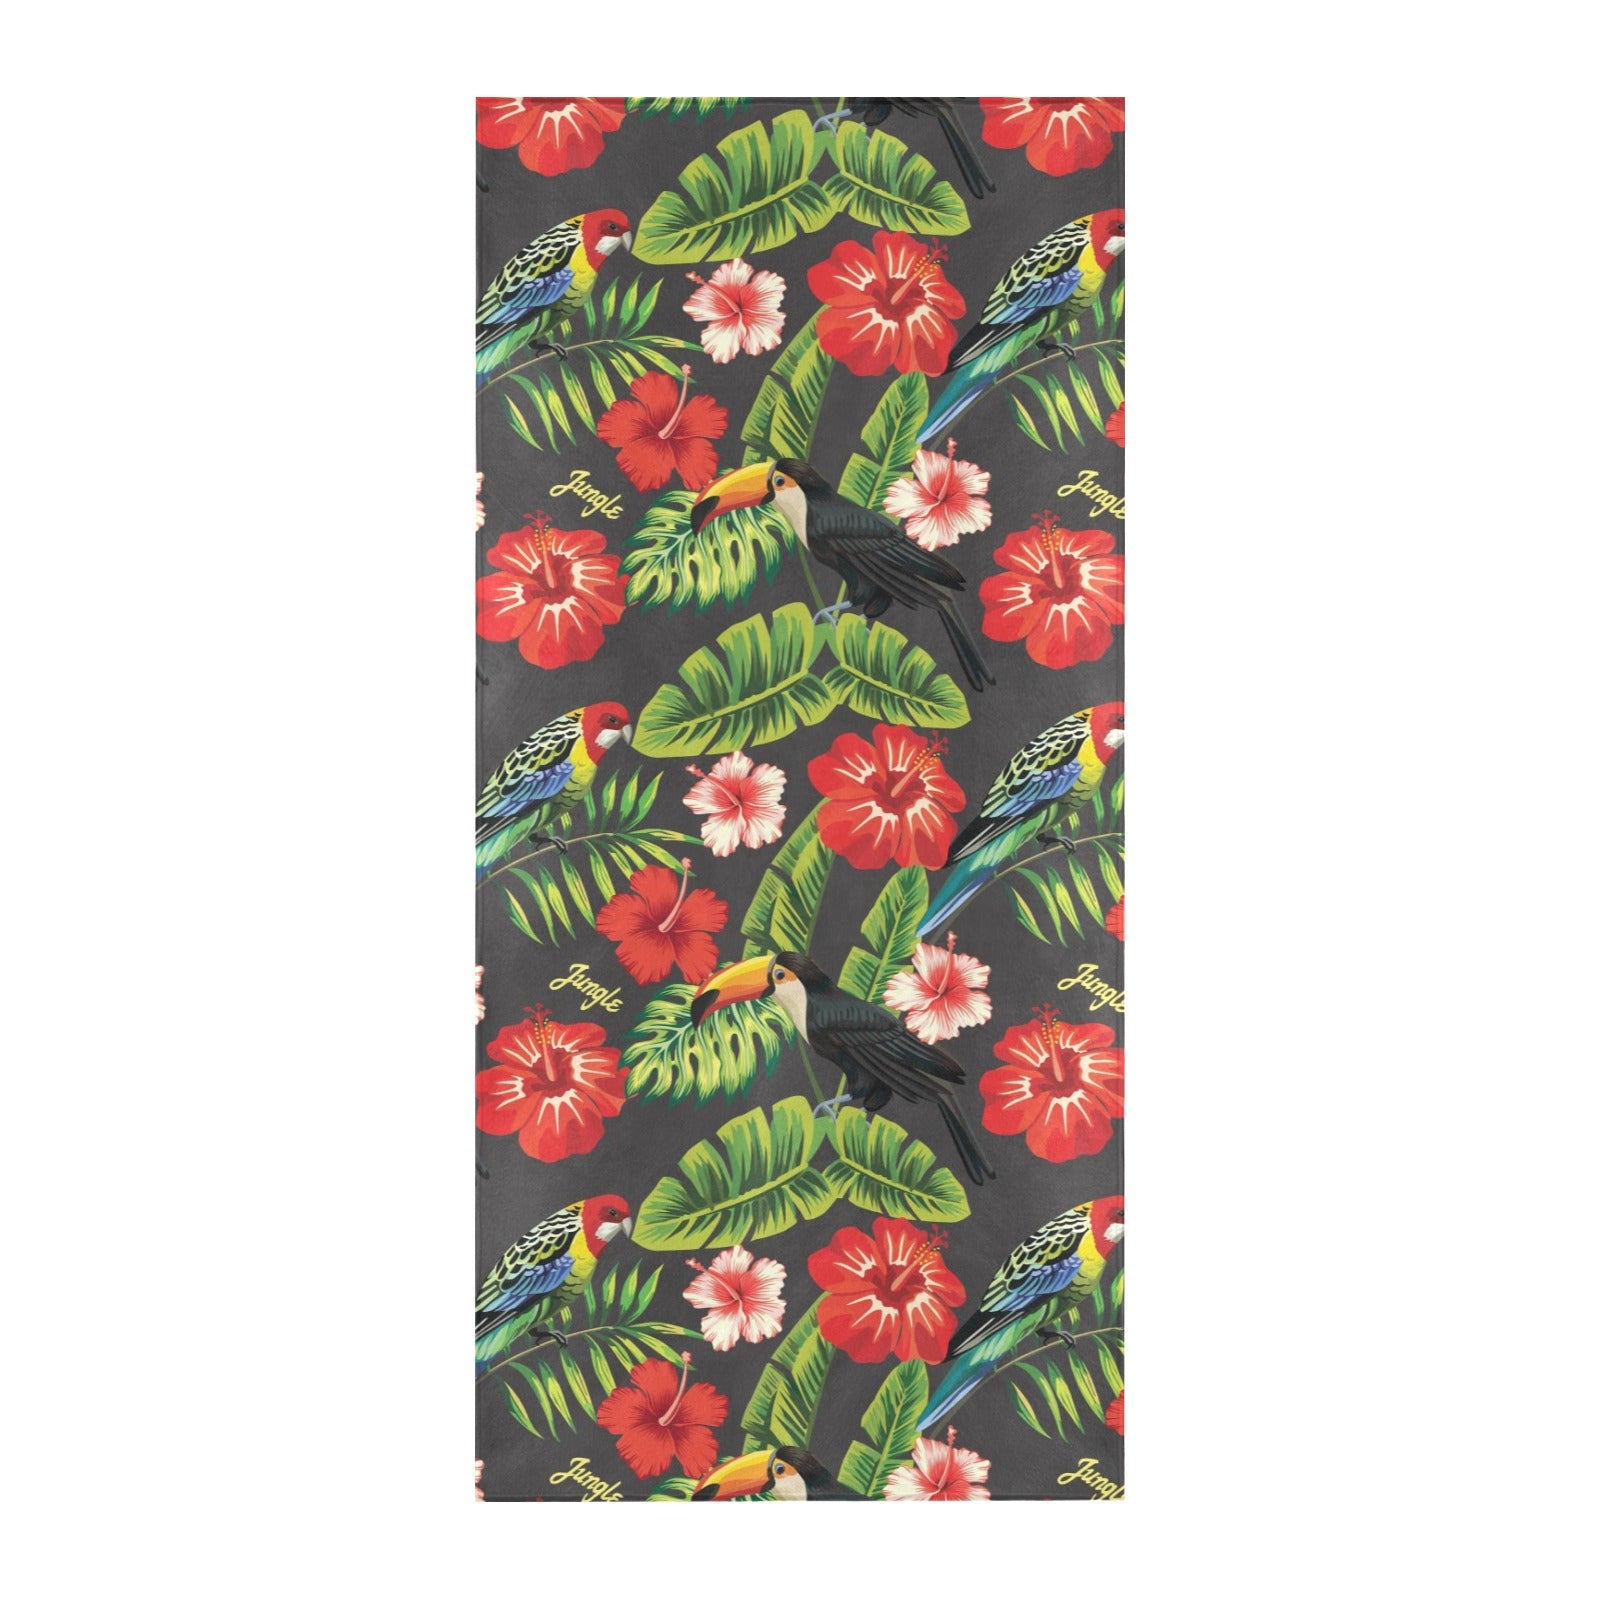 Hibiscus Red With Parrotprint Design LKS303 Beach Towel 32" x 71"